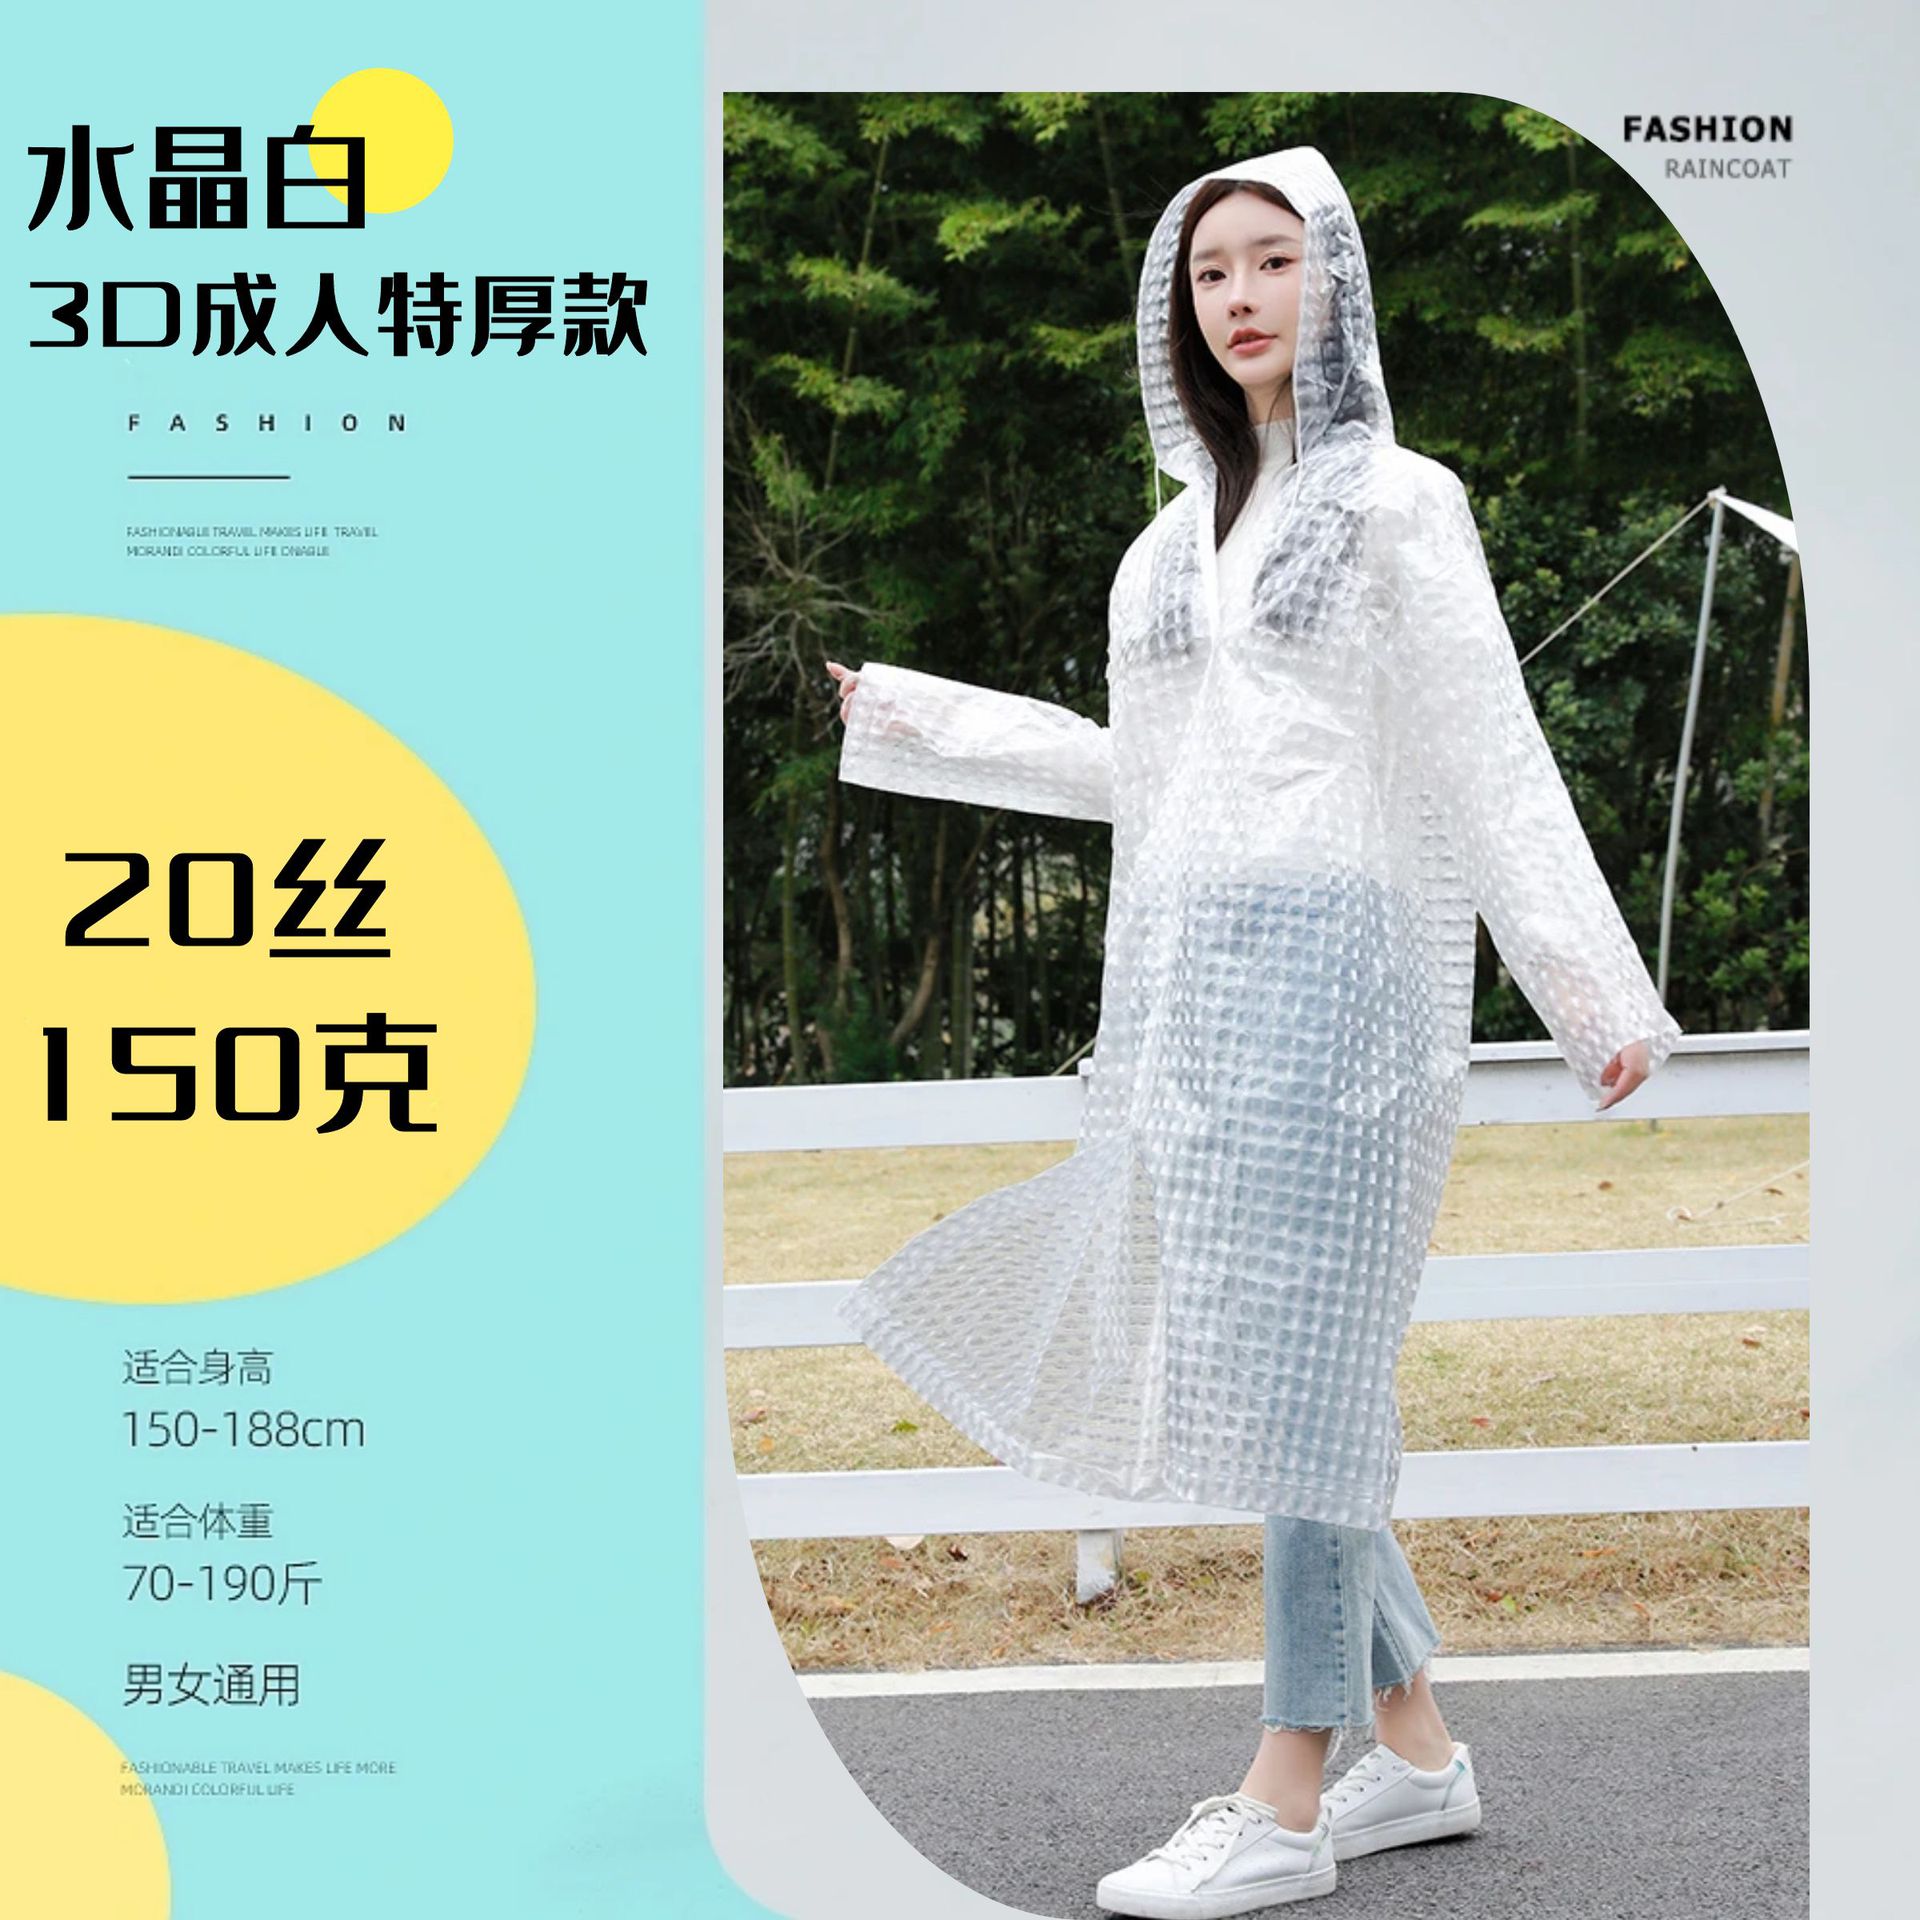 New Eva Thicken and Lengthen 3d Crystal Raincoat Outdoor Tourist Hiking Riding Portable Three-Dimensional Raincoat Poncho